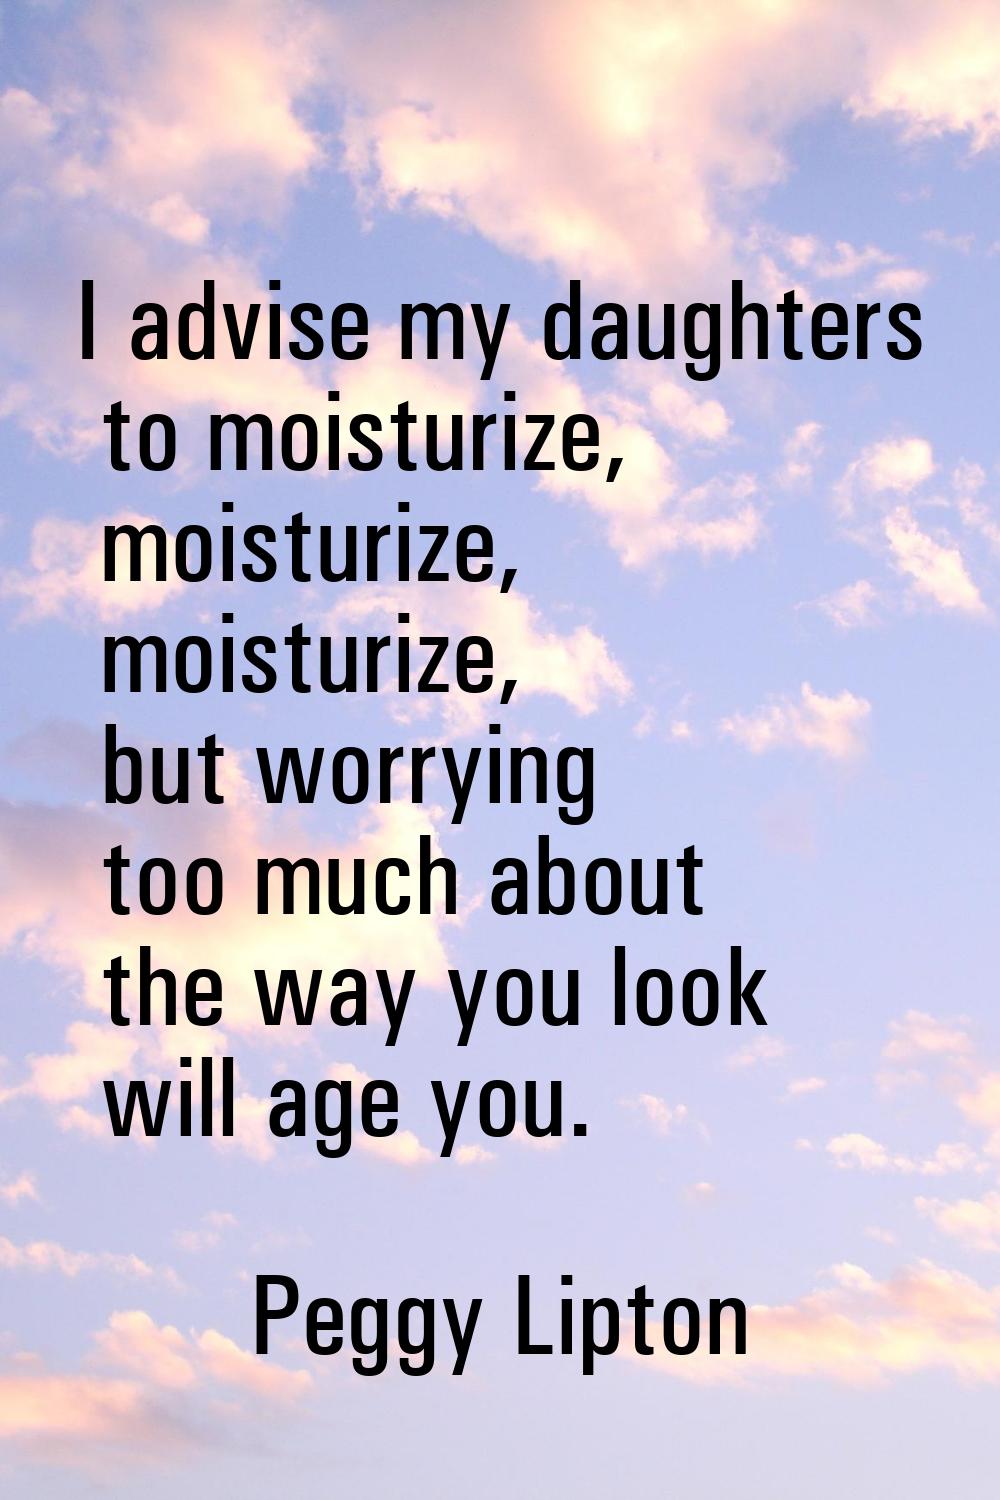 I advise my daughters to moisturize, moisturize, moisturize, but worrying too much about the way yo